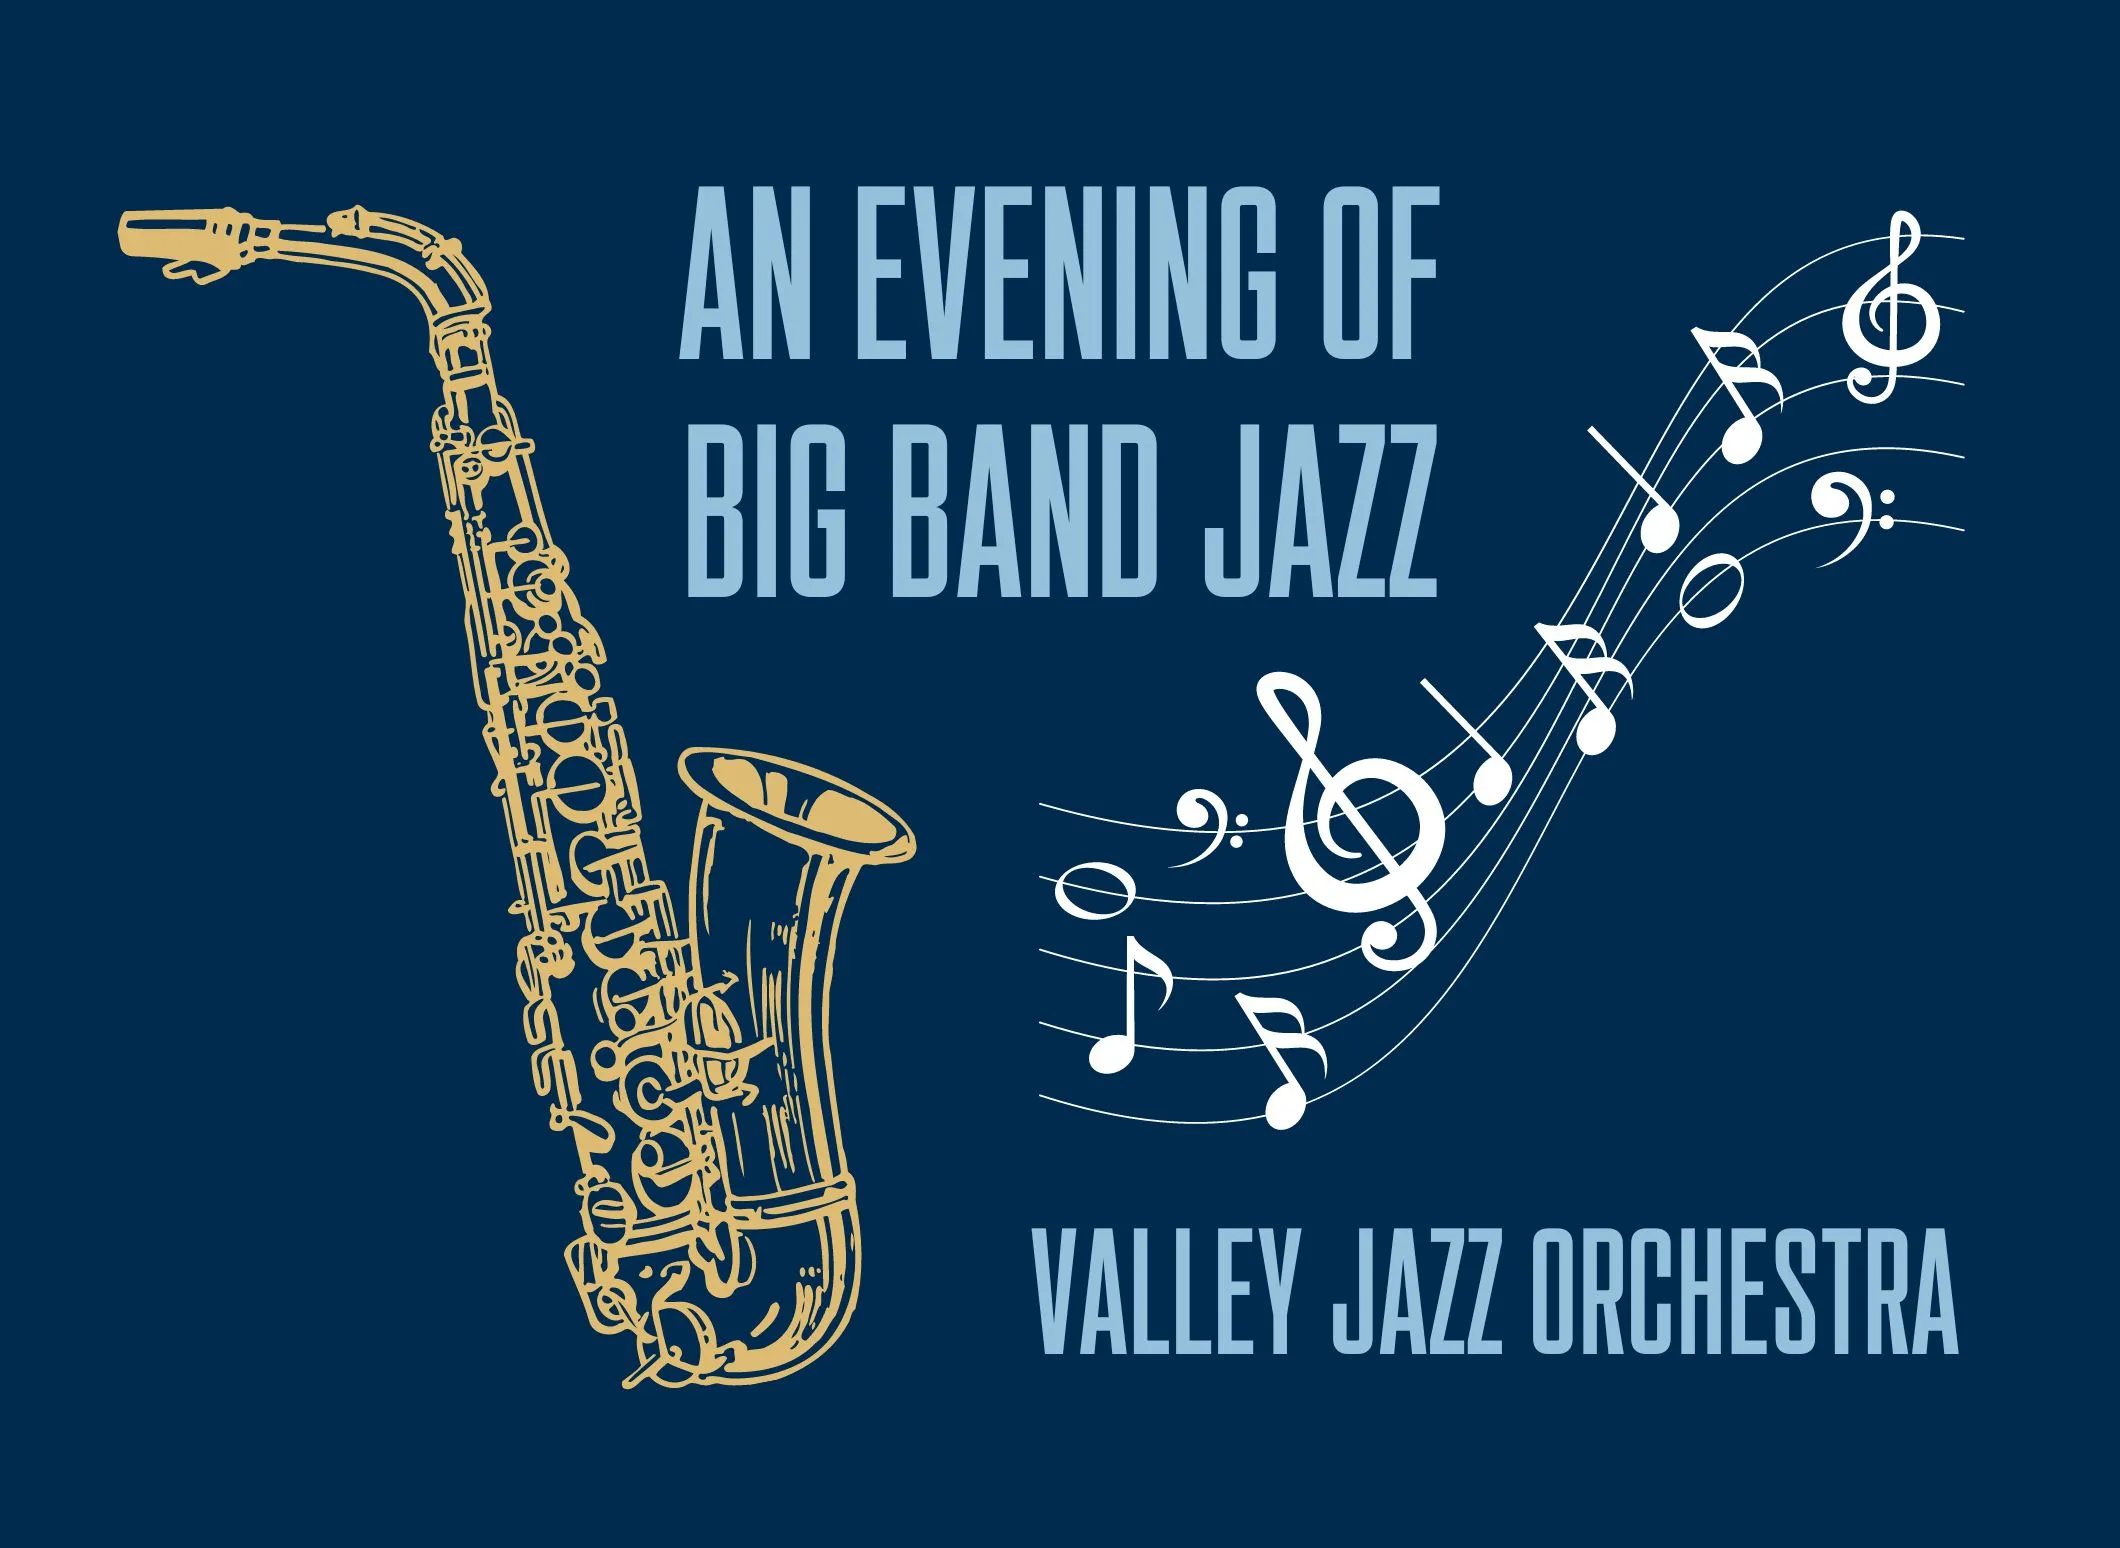 Graphic with saxophone and music notes promoting An Evening of Big Band Jazz